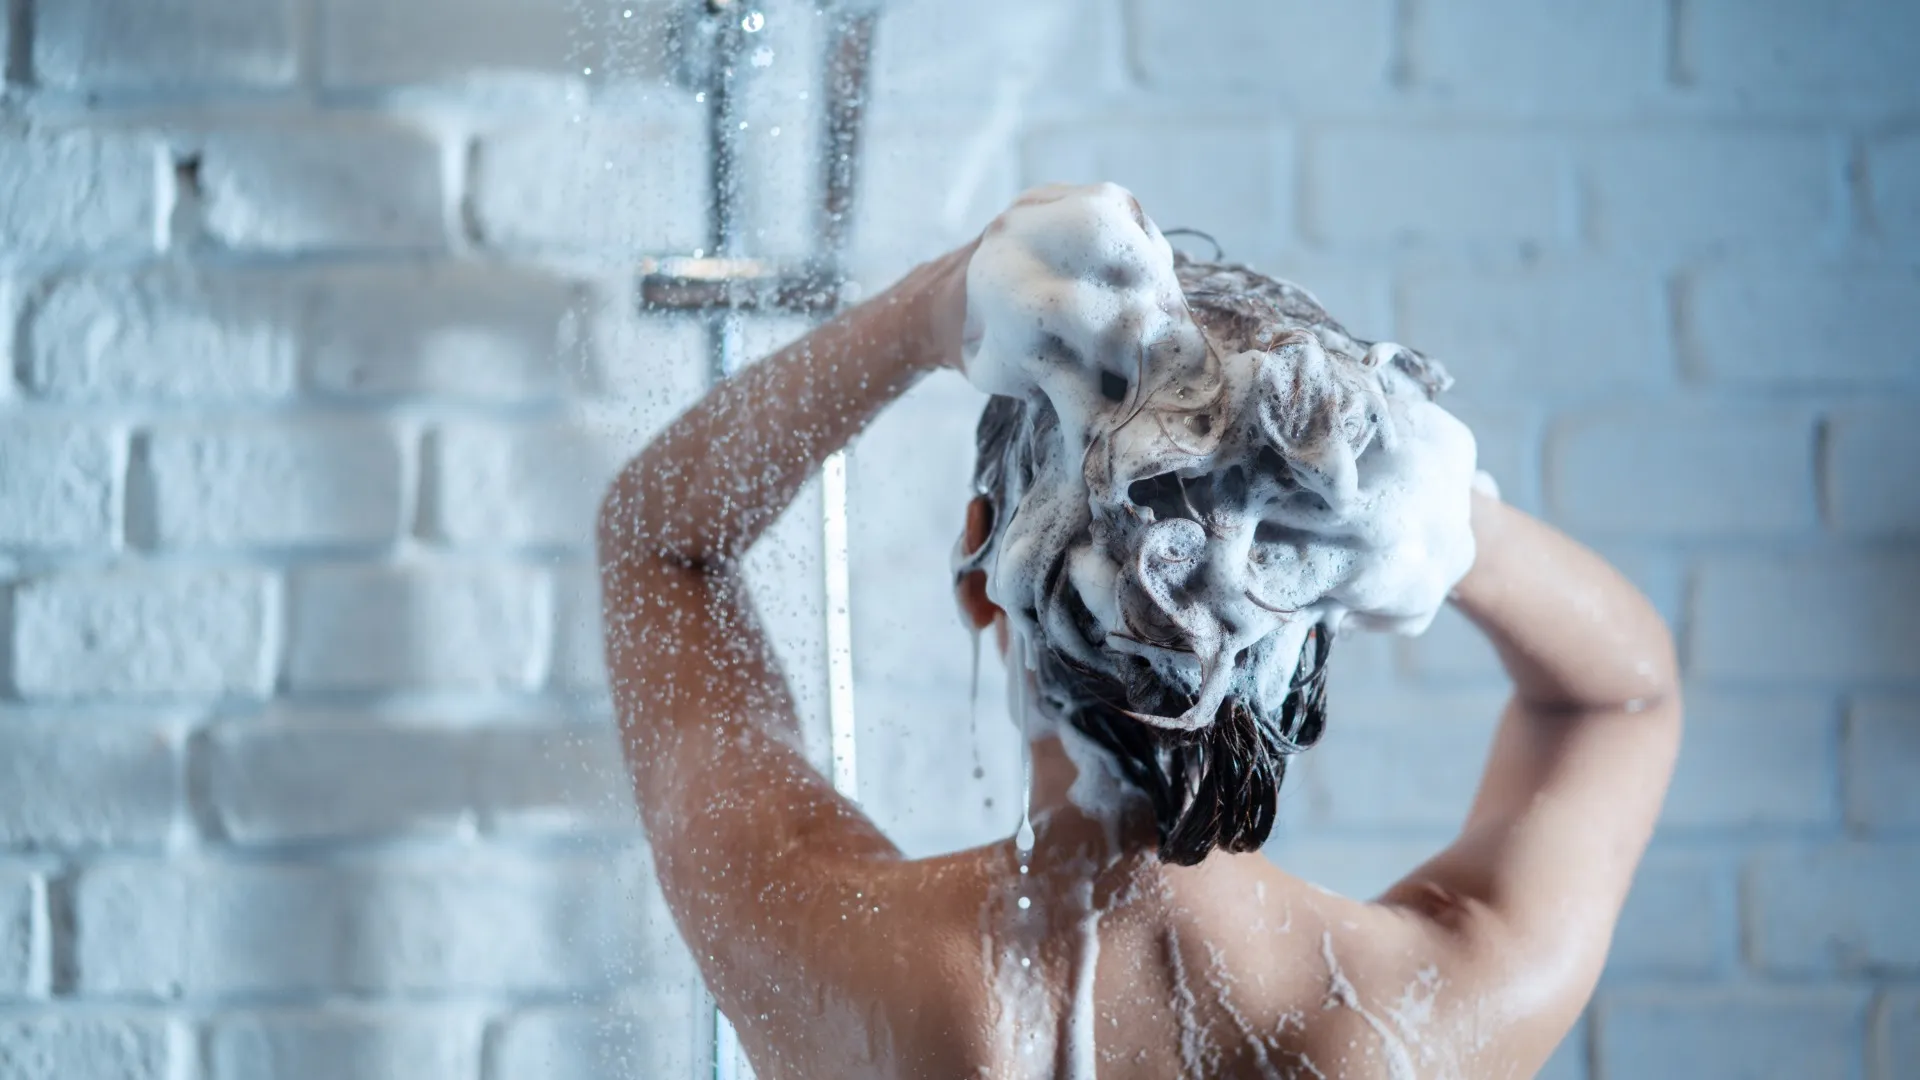 Cleaner Hair Products: 7 Toxins to Pass On